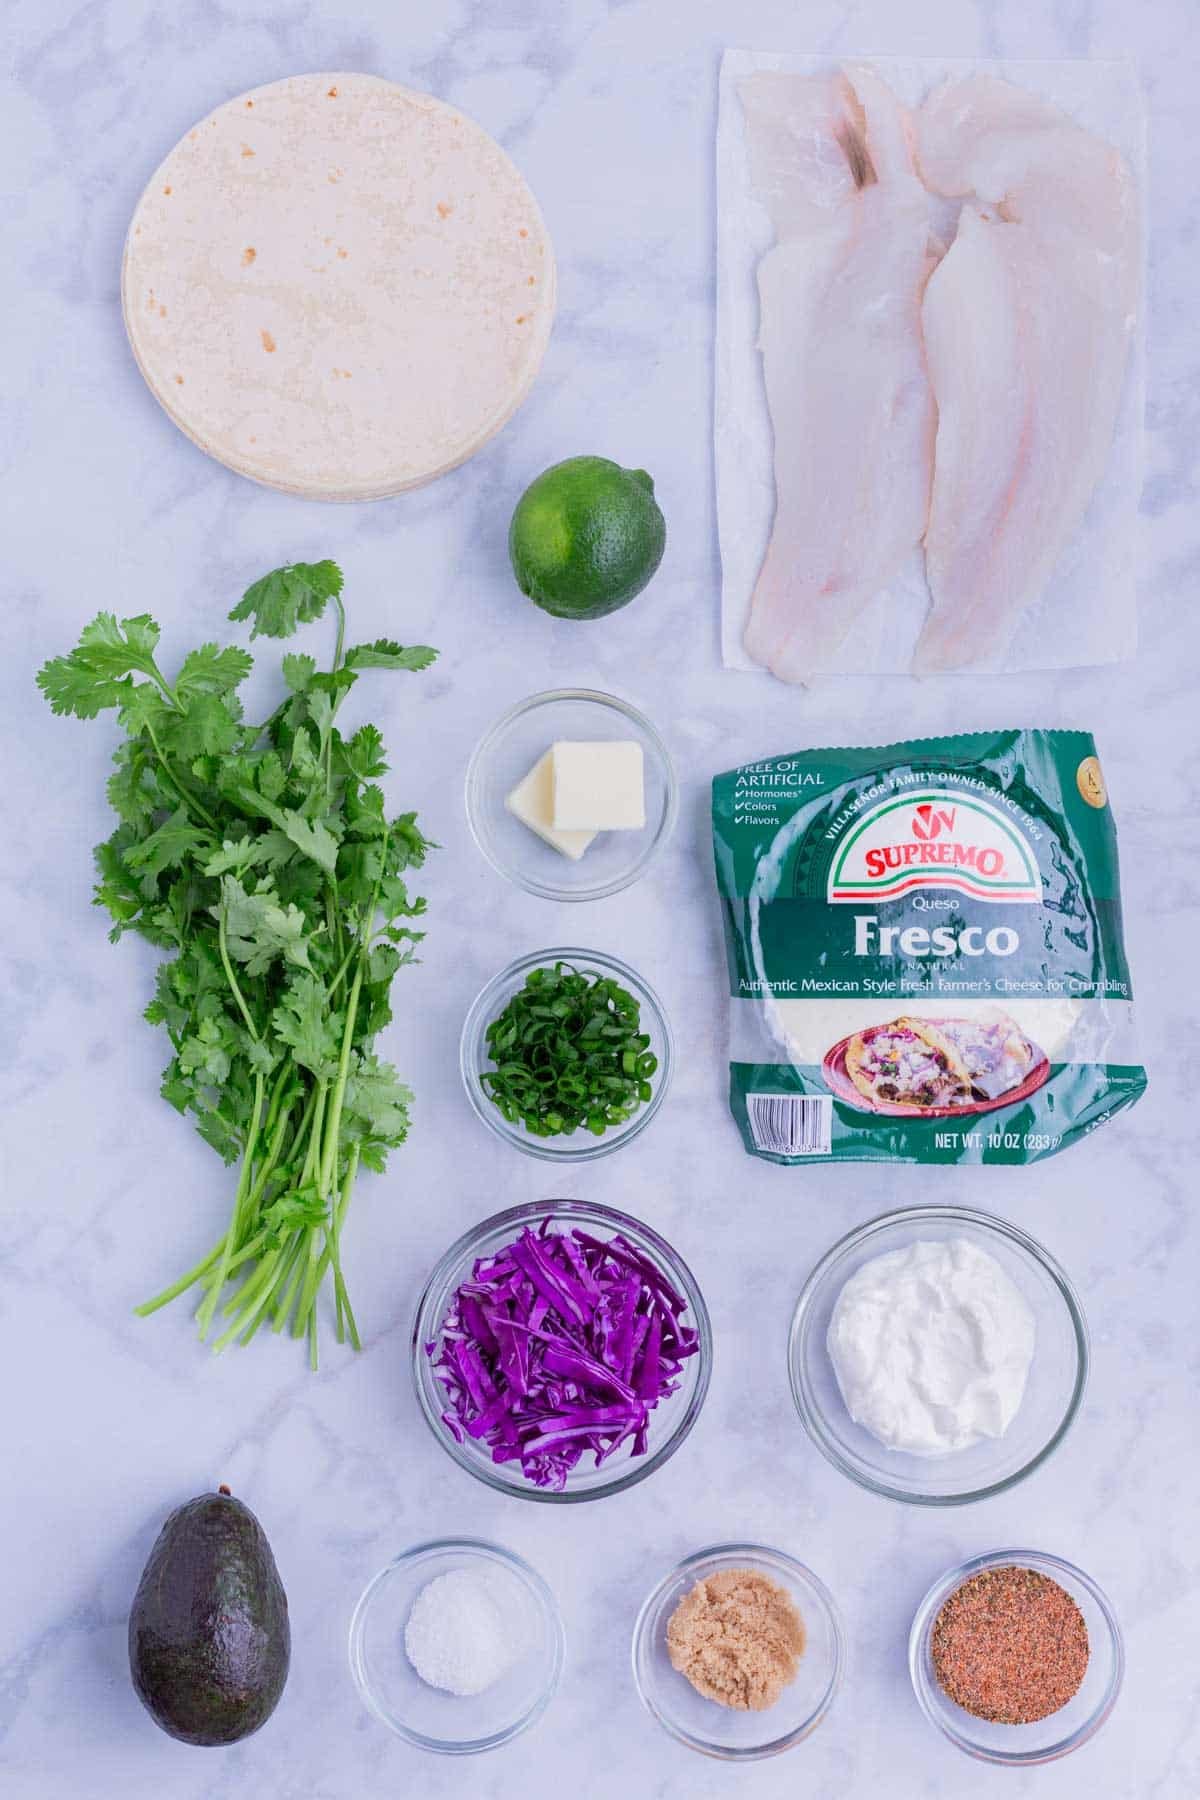 White fish, cilantro, blackened seasoning, avocado, sour cream, and cabbage are the main ingredients for these tacos.